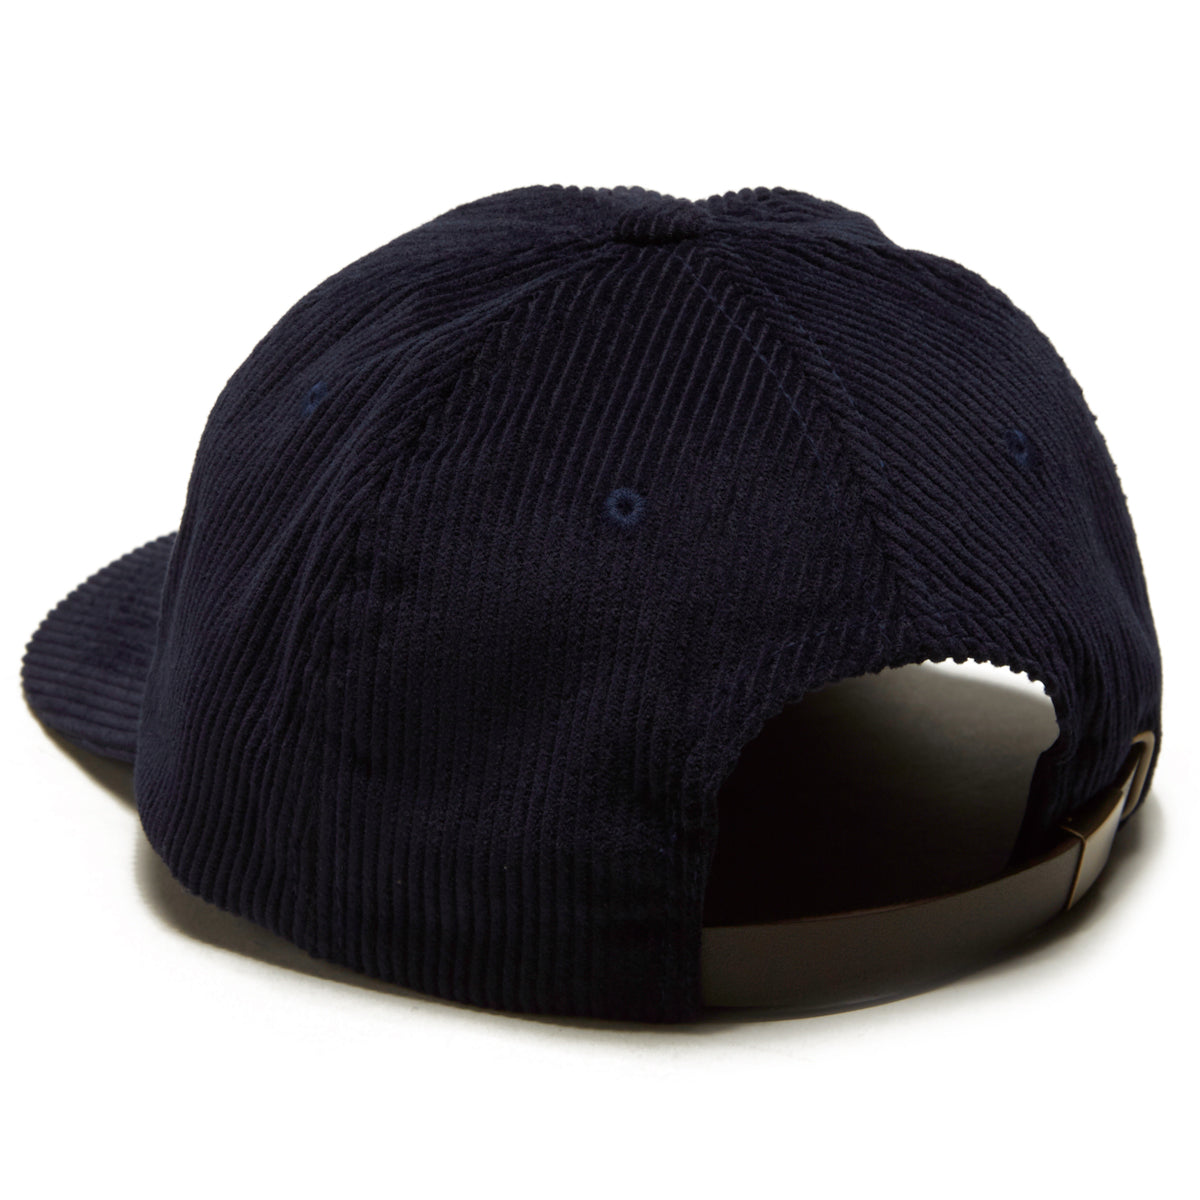 Brixton Parsons Lp Hat - Washed Navy Cord image 2